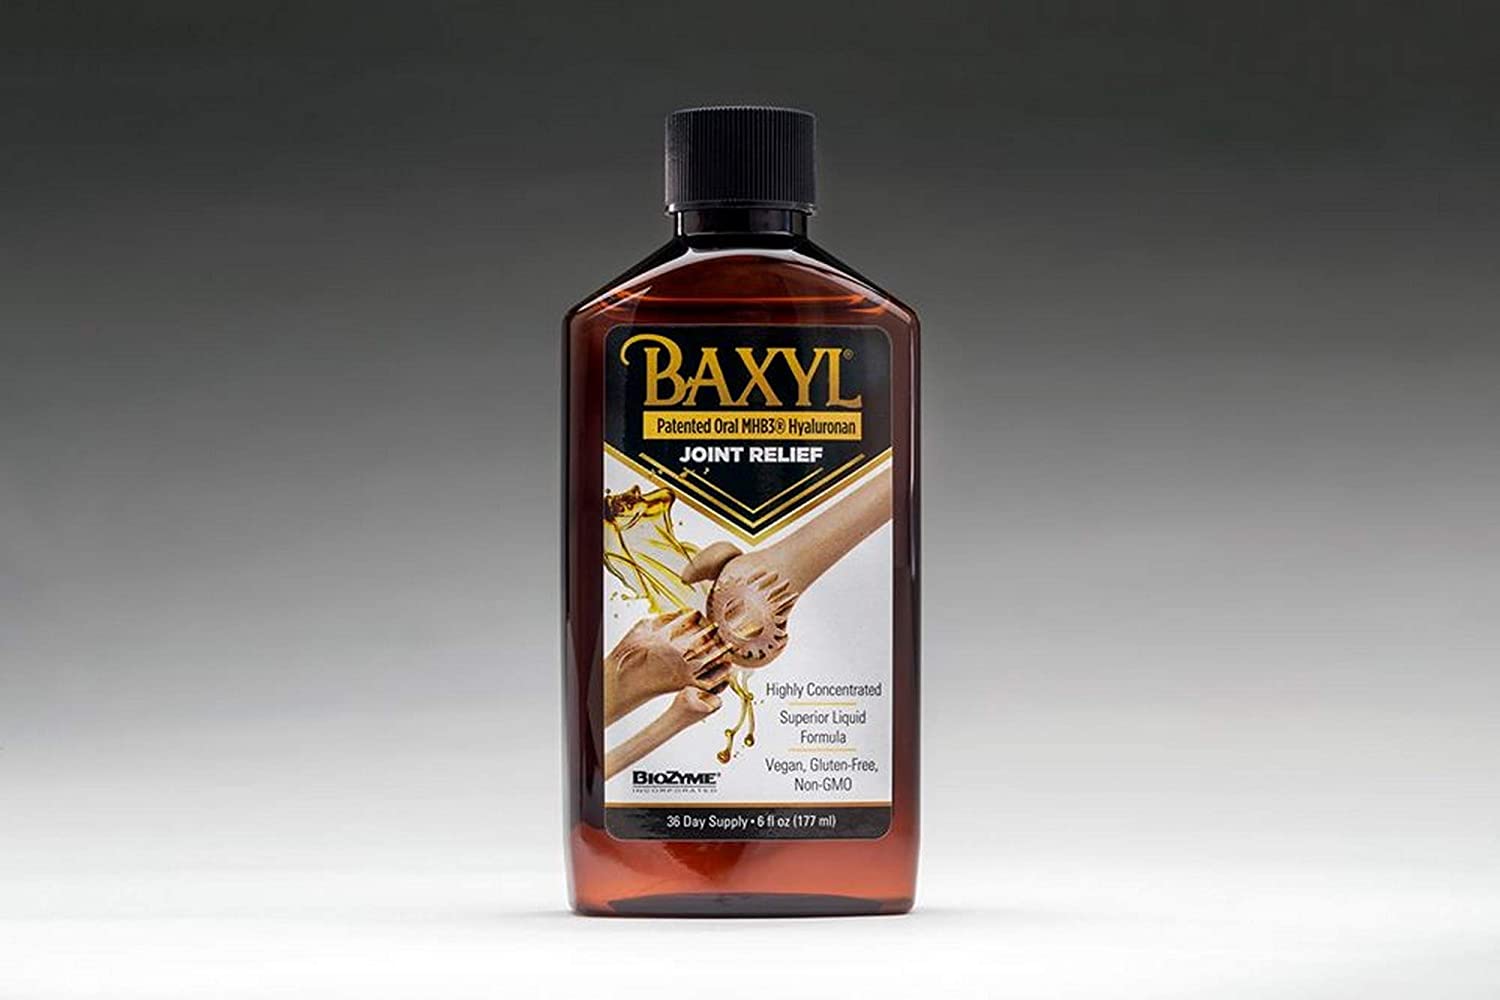 Baxyl® - Liquid Hyaluronan Acid for Joint Relief Supplement (Vegan, Gluten-Free, Non-GMO, Patented Oral MHB3). 6 Ounce, 36 day supply